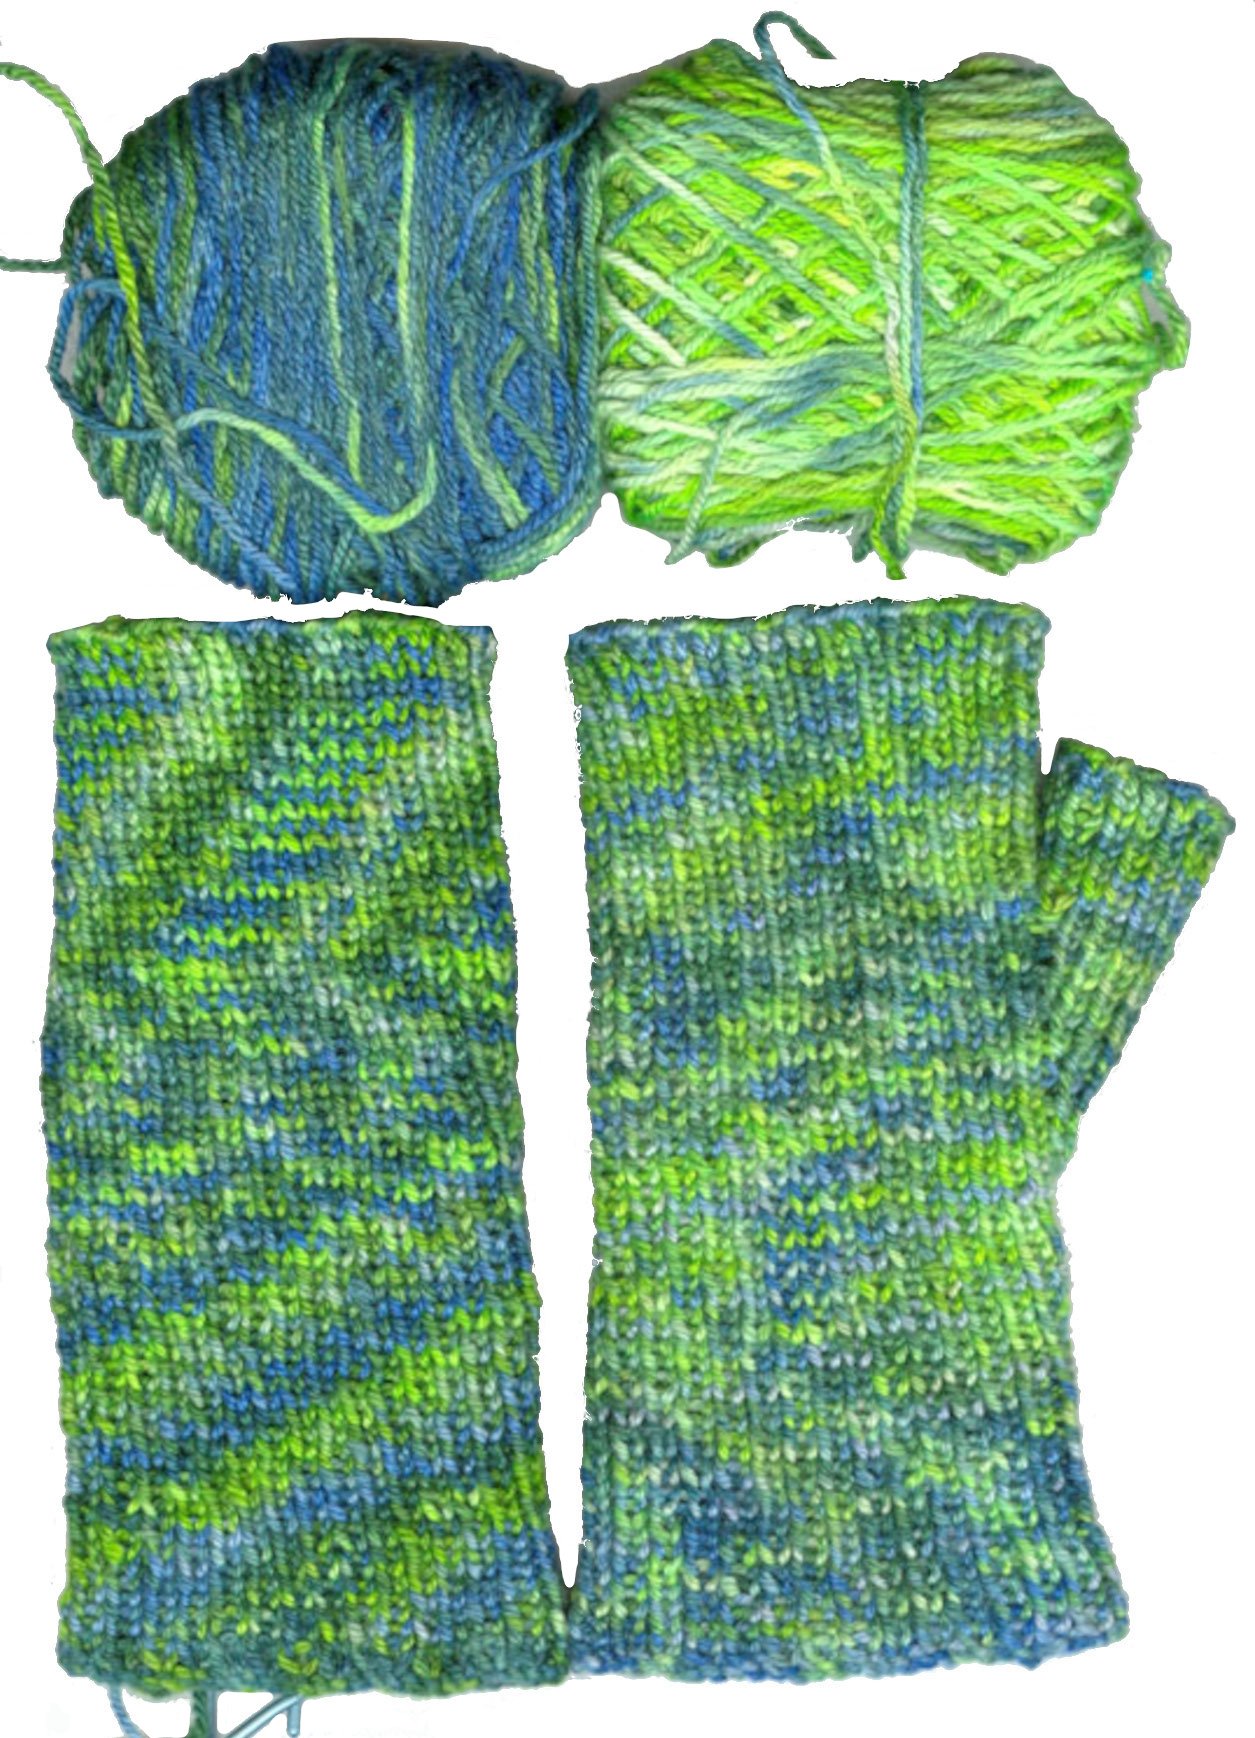 a pair of hand knit hand warmers in mottled gren and teal yarn with two very different color balls of yarn